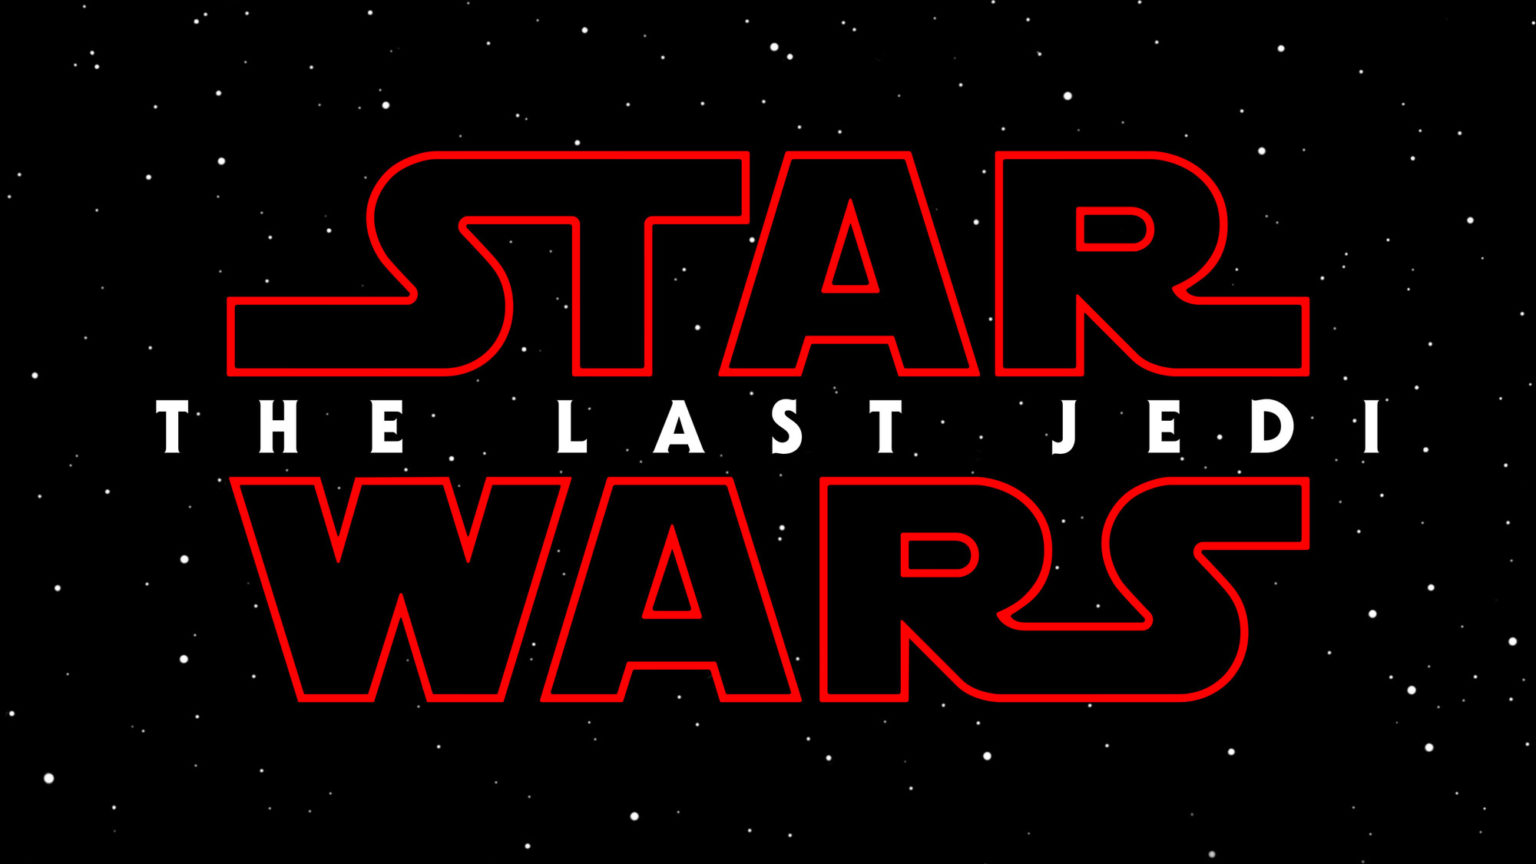 Star Wars Rumor Round-up: A Firehose of Clues From the 'Last Jedi' Cast